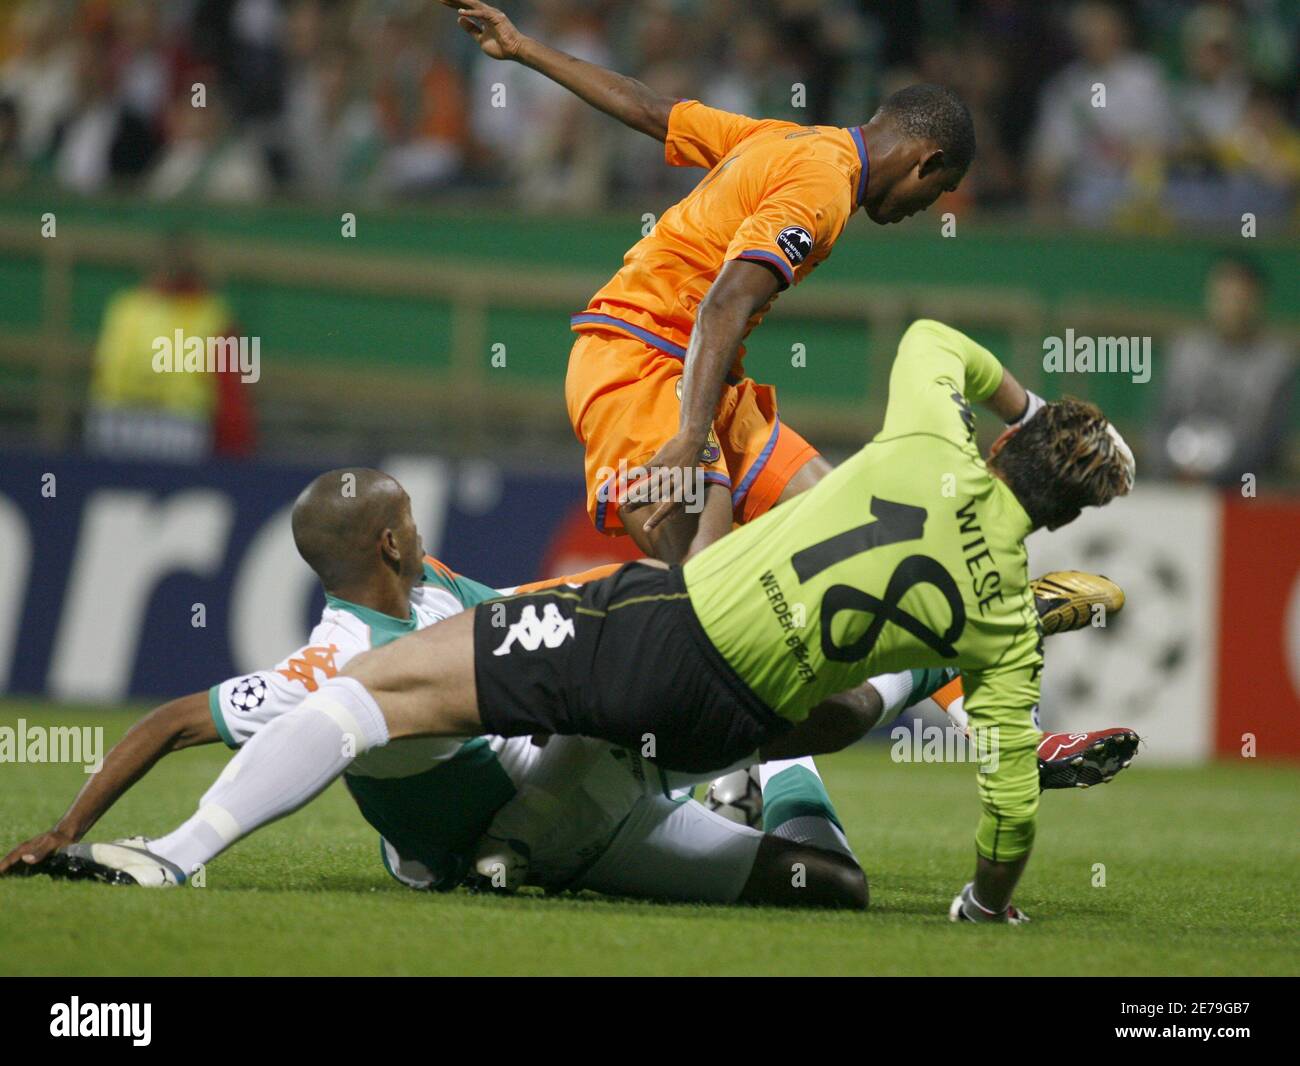 Werder Bremen's Naldo (L) and Tim Wiese (R) challenge Barcelona's Samuel  Eto'o during their Champions League Group A soccer match in Bremen  September 27, 2006. REUTERS/Ina Fassbender (GERMANY Stock Photo - Alamy